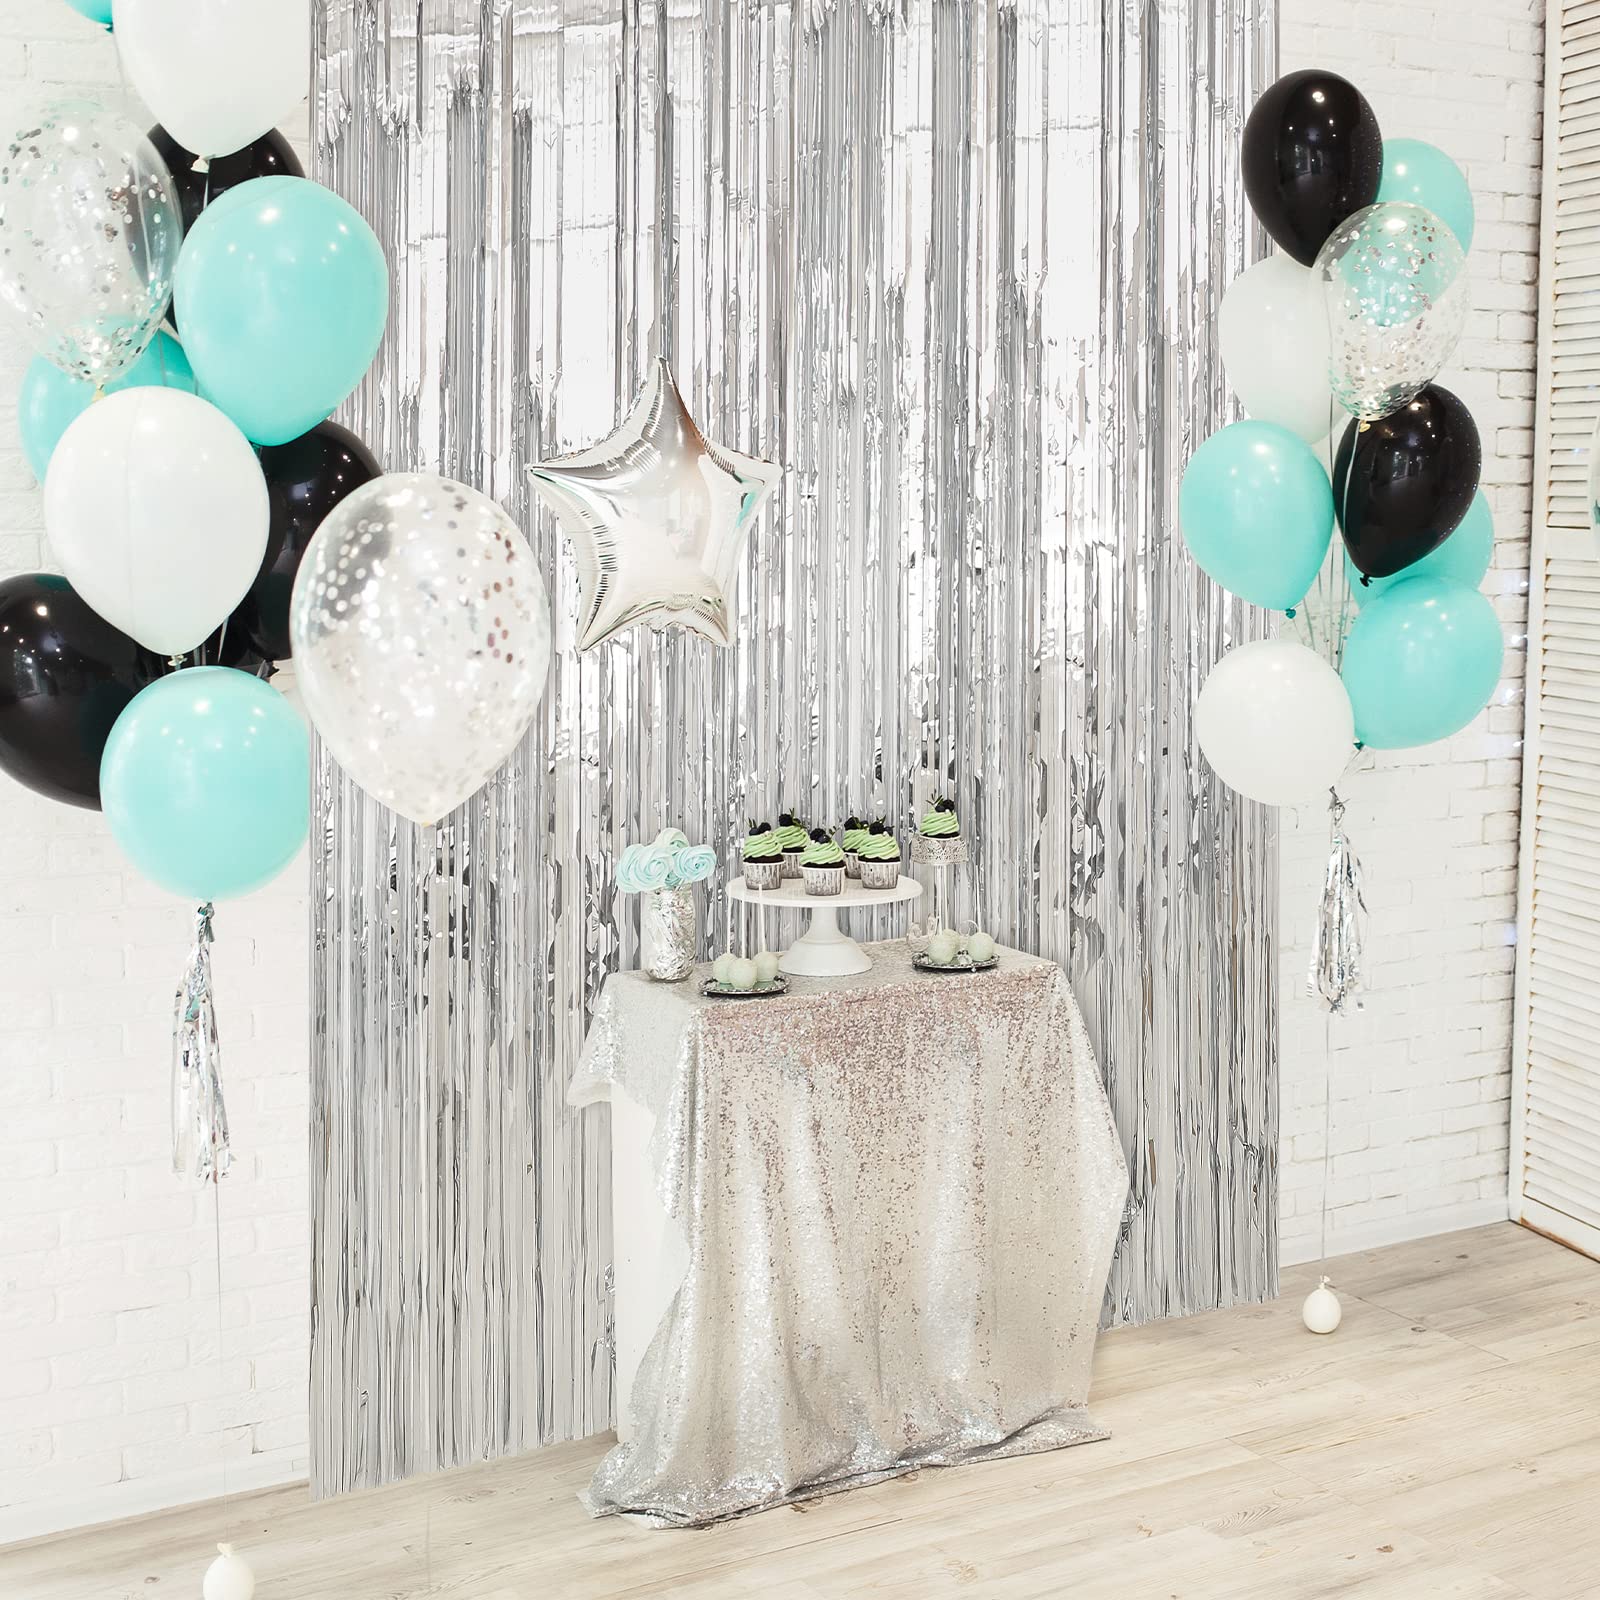 Crosize 4 Pack 3.3 x 8.2 ft Foil Fringe Curtains Party Decorations, Silver Tinsel Curtain Backdrop for Parties, Door Streamers, Glitter Streamer Fringe Backdrop for Birthday Decoration (Silver)